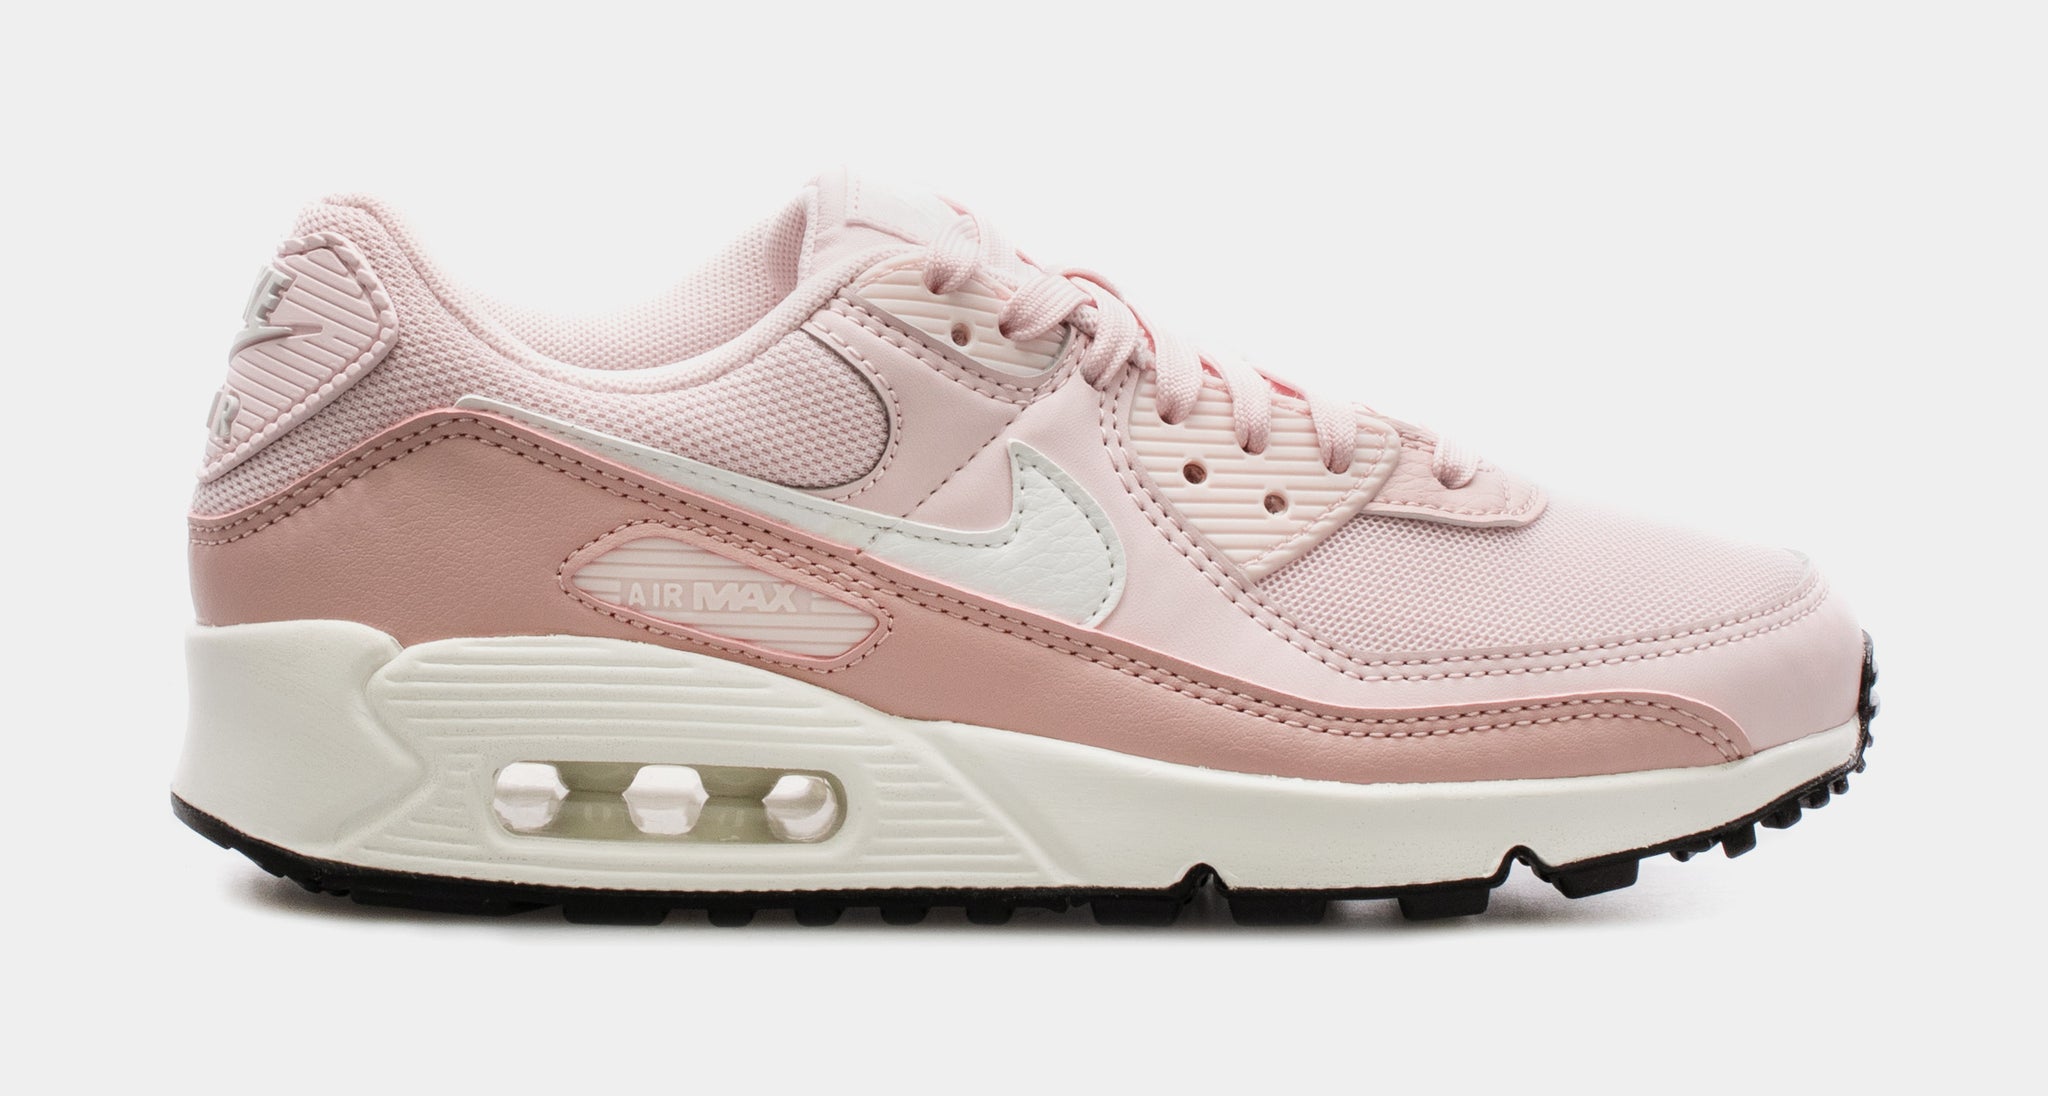 Nike Air Max Womens Lifestyle Shoes Pink DH8010-600 – Shoe Palace